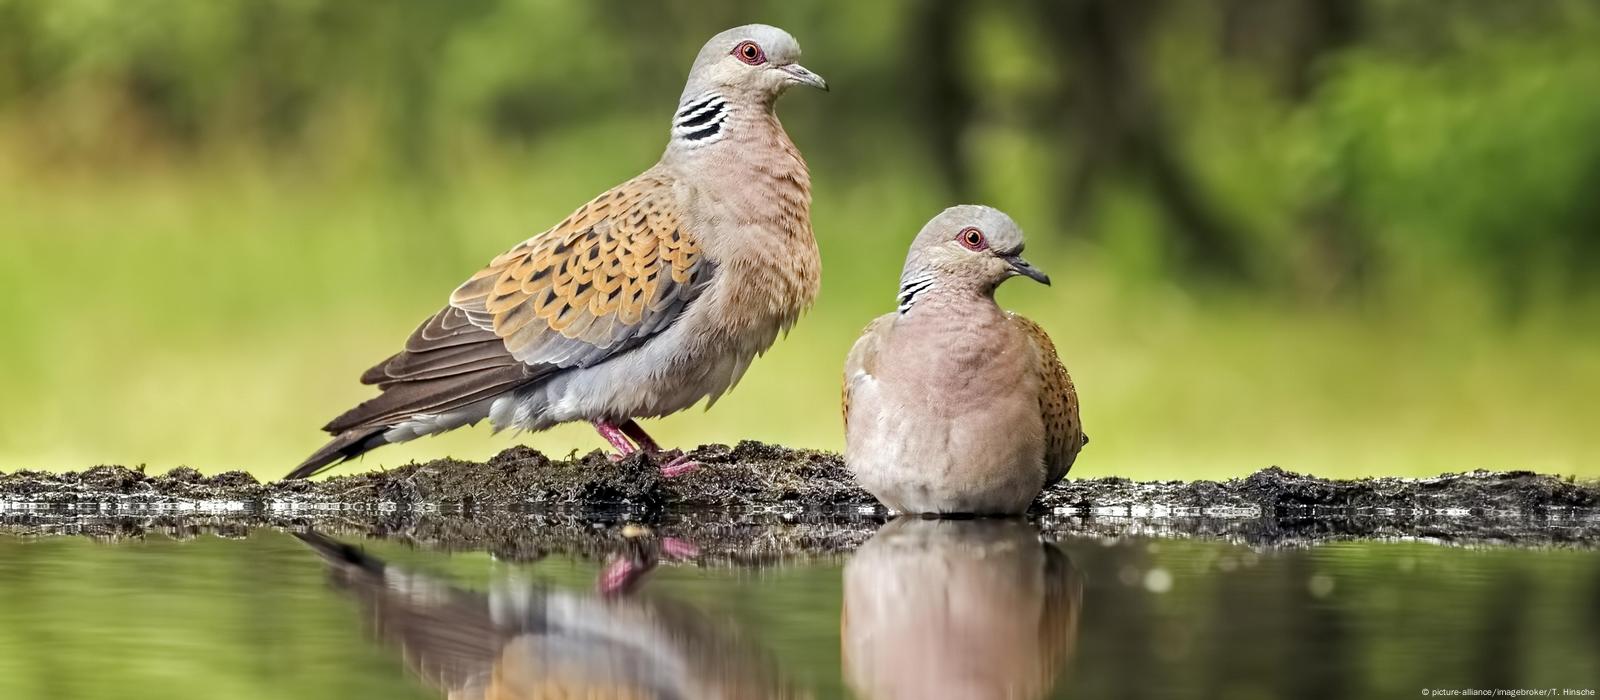 Endangered turtle dove 2020 bird of the year – DW – 10/11/2019